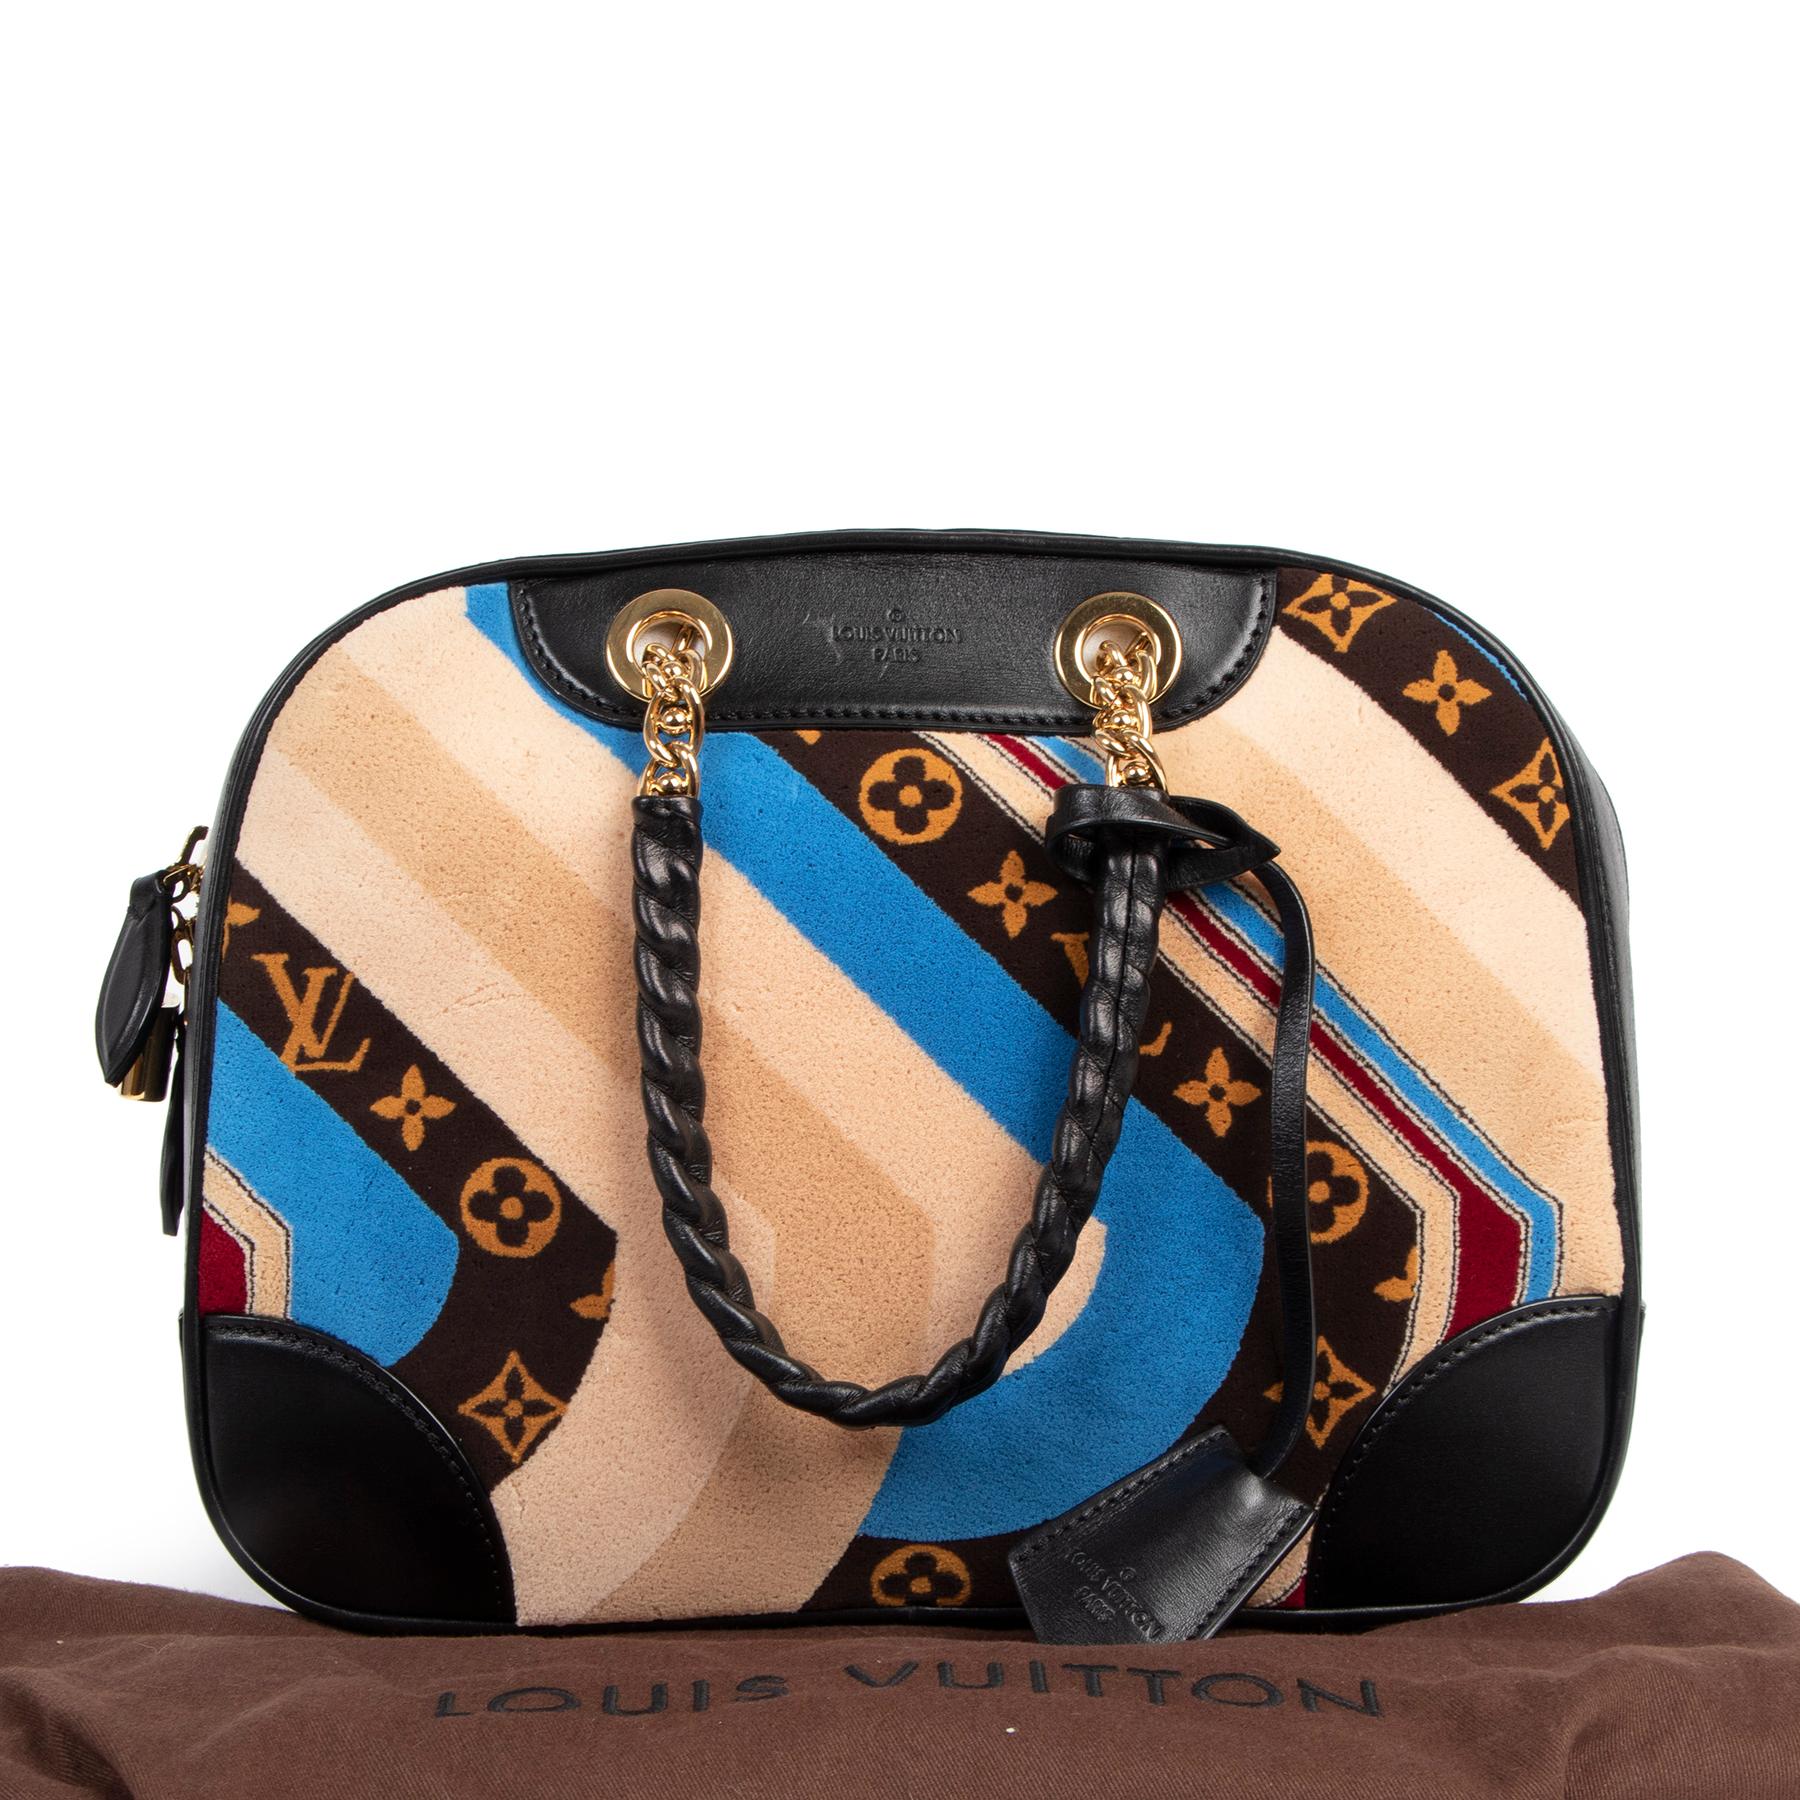 Everyone loves a good Louis Vuitton classic but every once in a while it can be fun to stand out from the crowd. This incredible Limited Edition Vanity Tuffetage Bowling bag is truly a unique and rare piece that will make everyone envy you! This bag